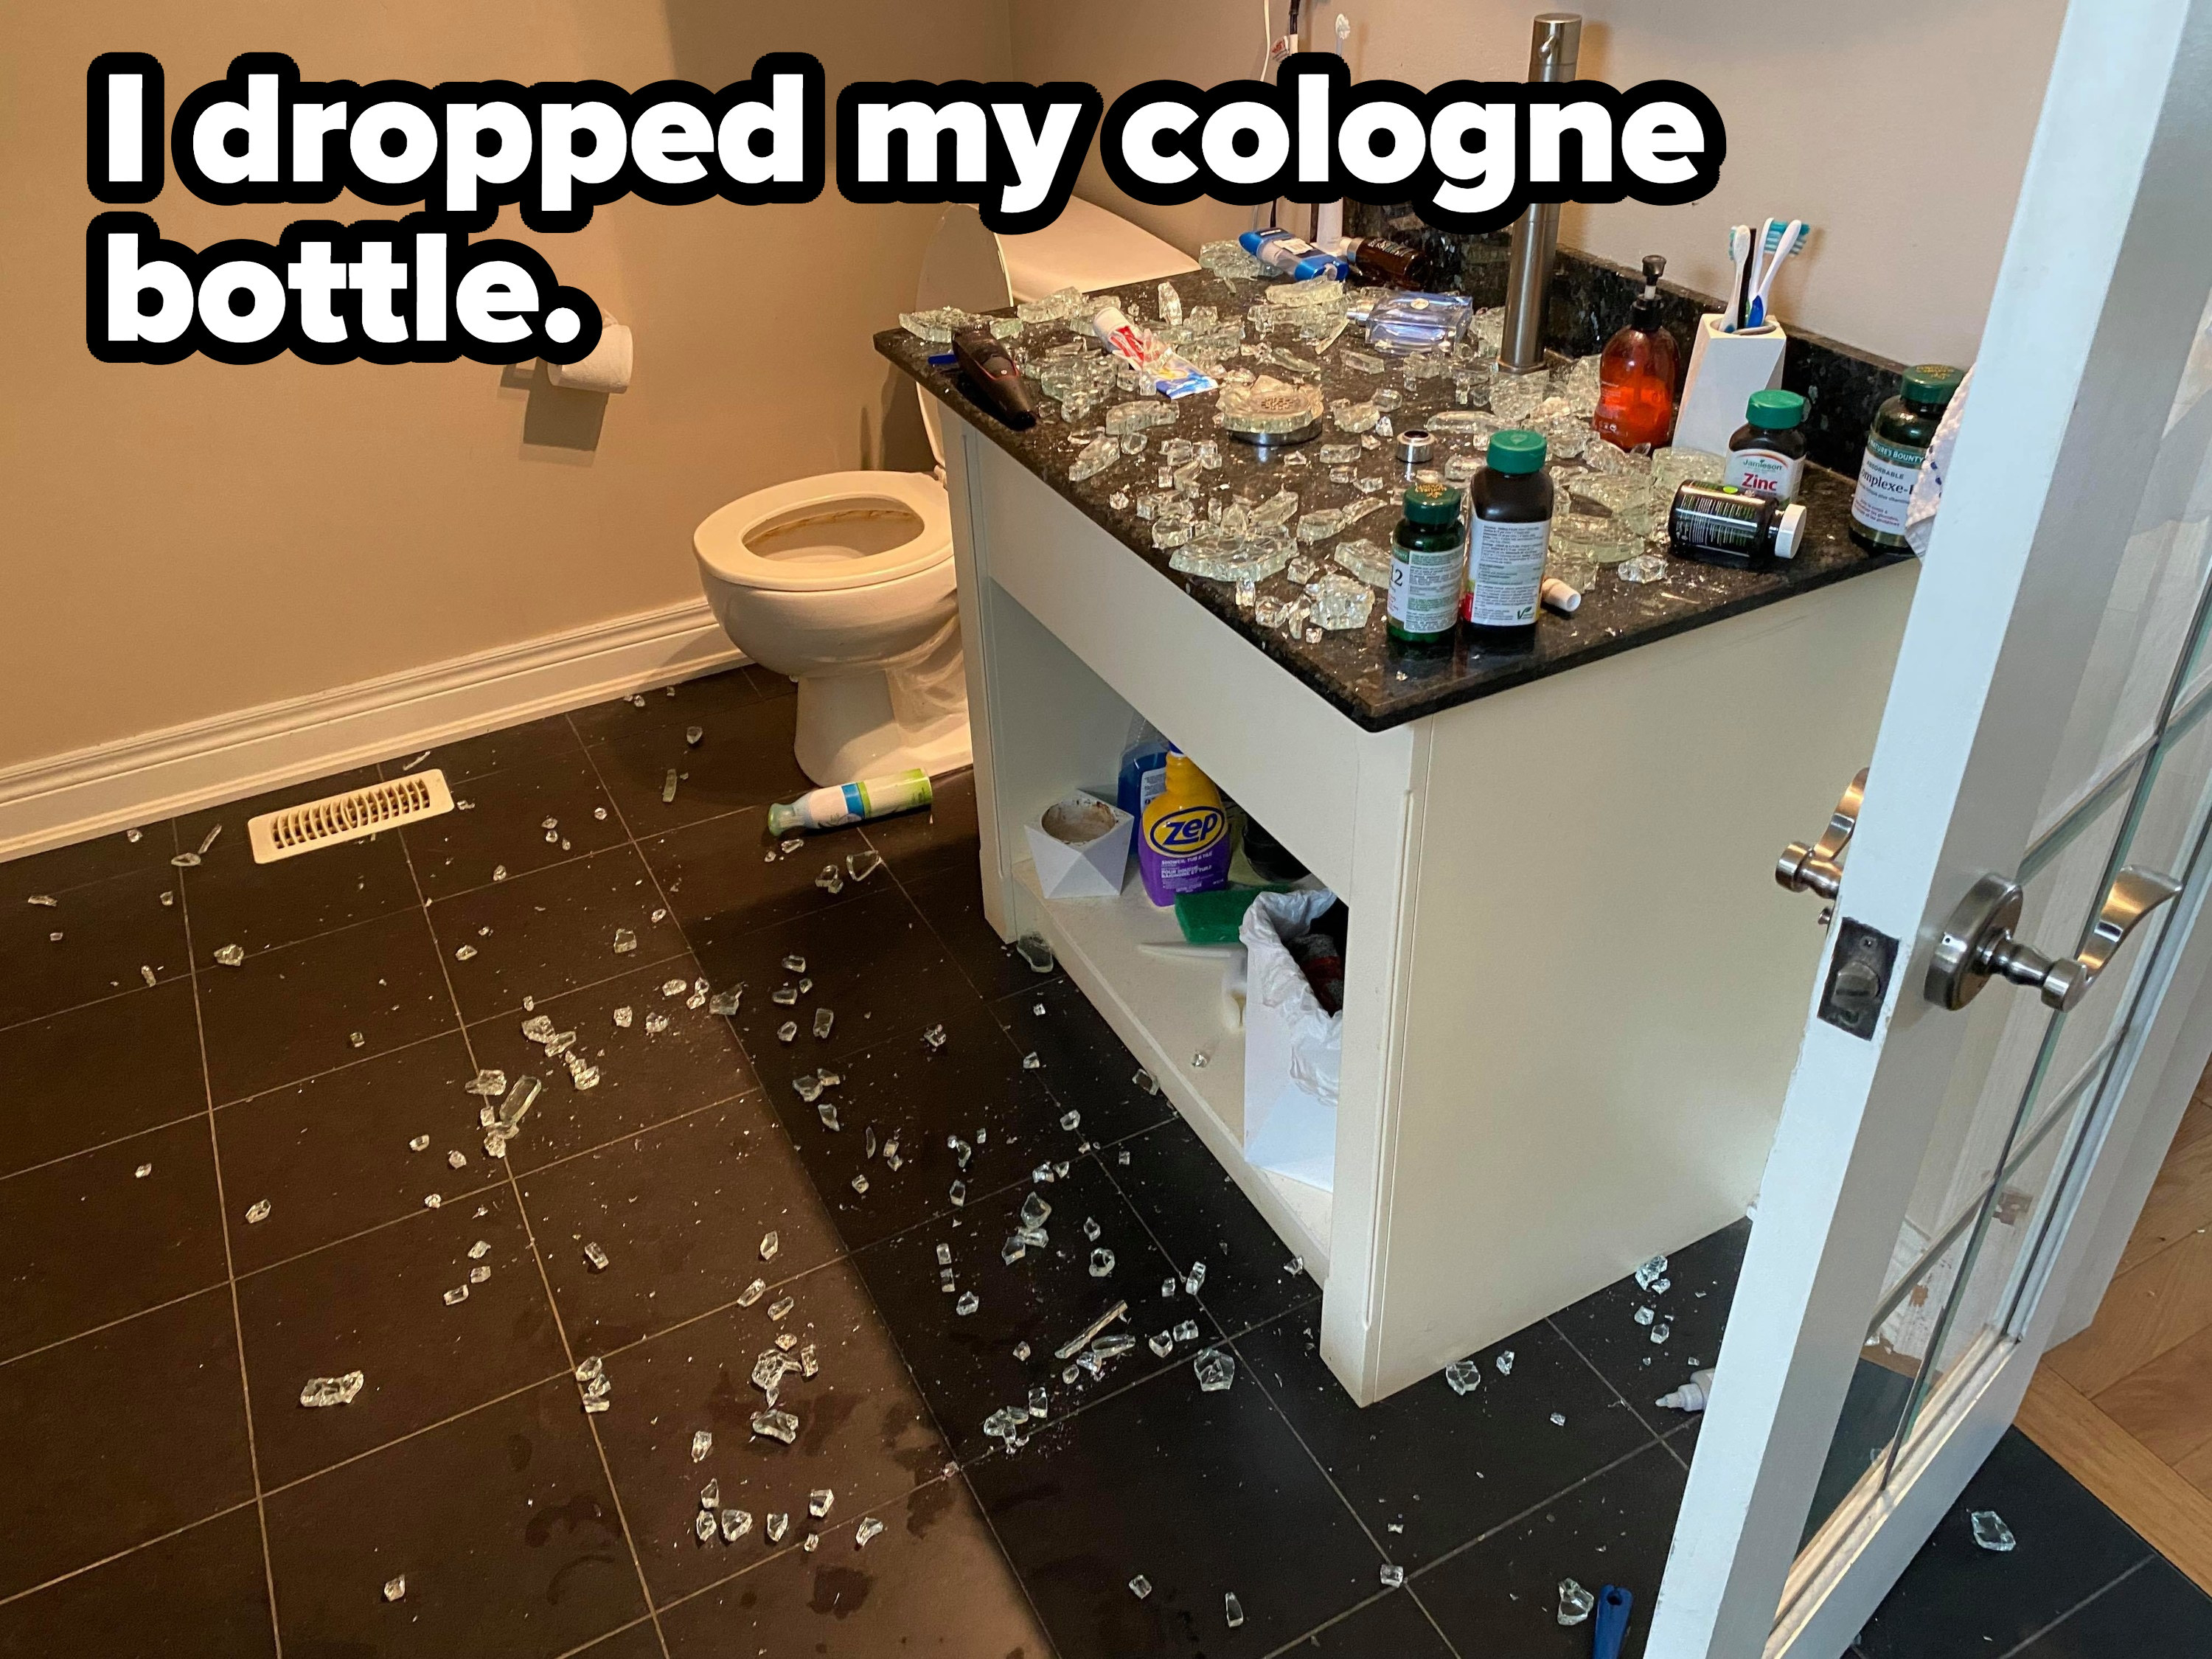 Pieces of glass all over a bathroom counter and the tiled floor